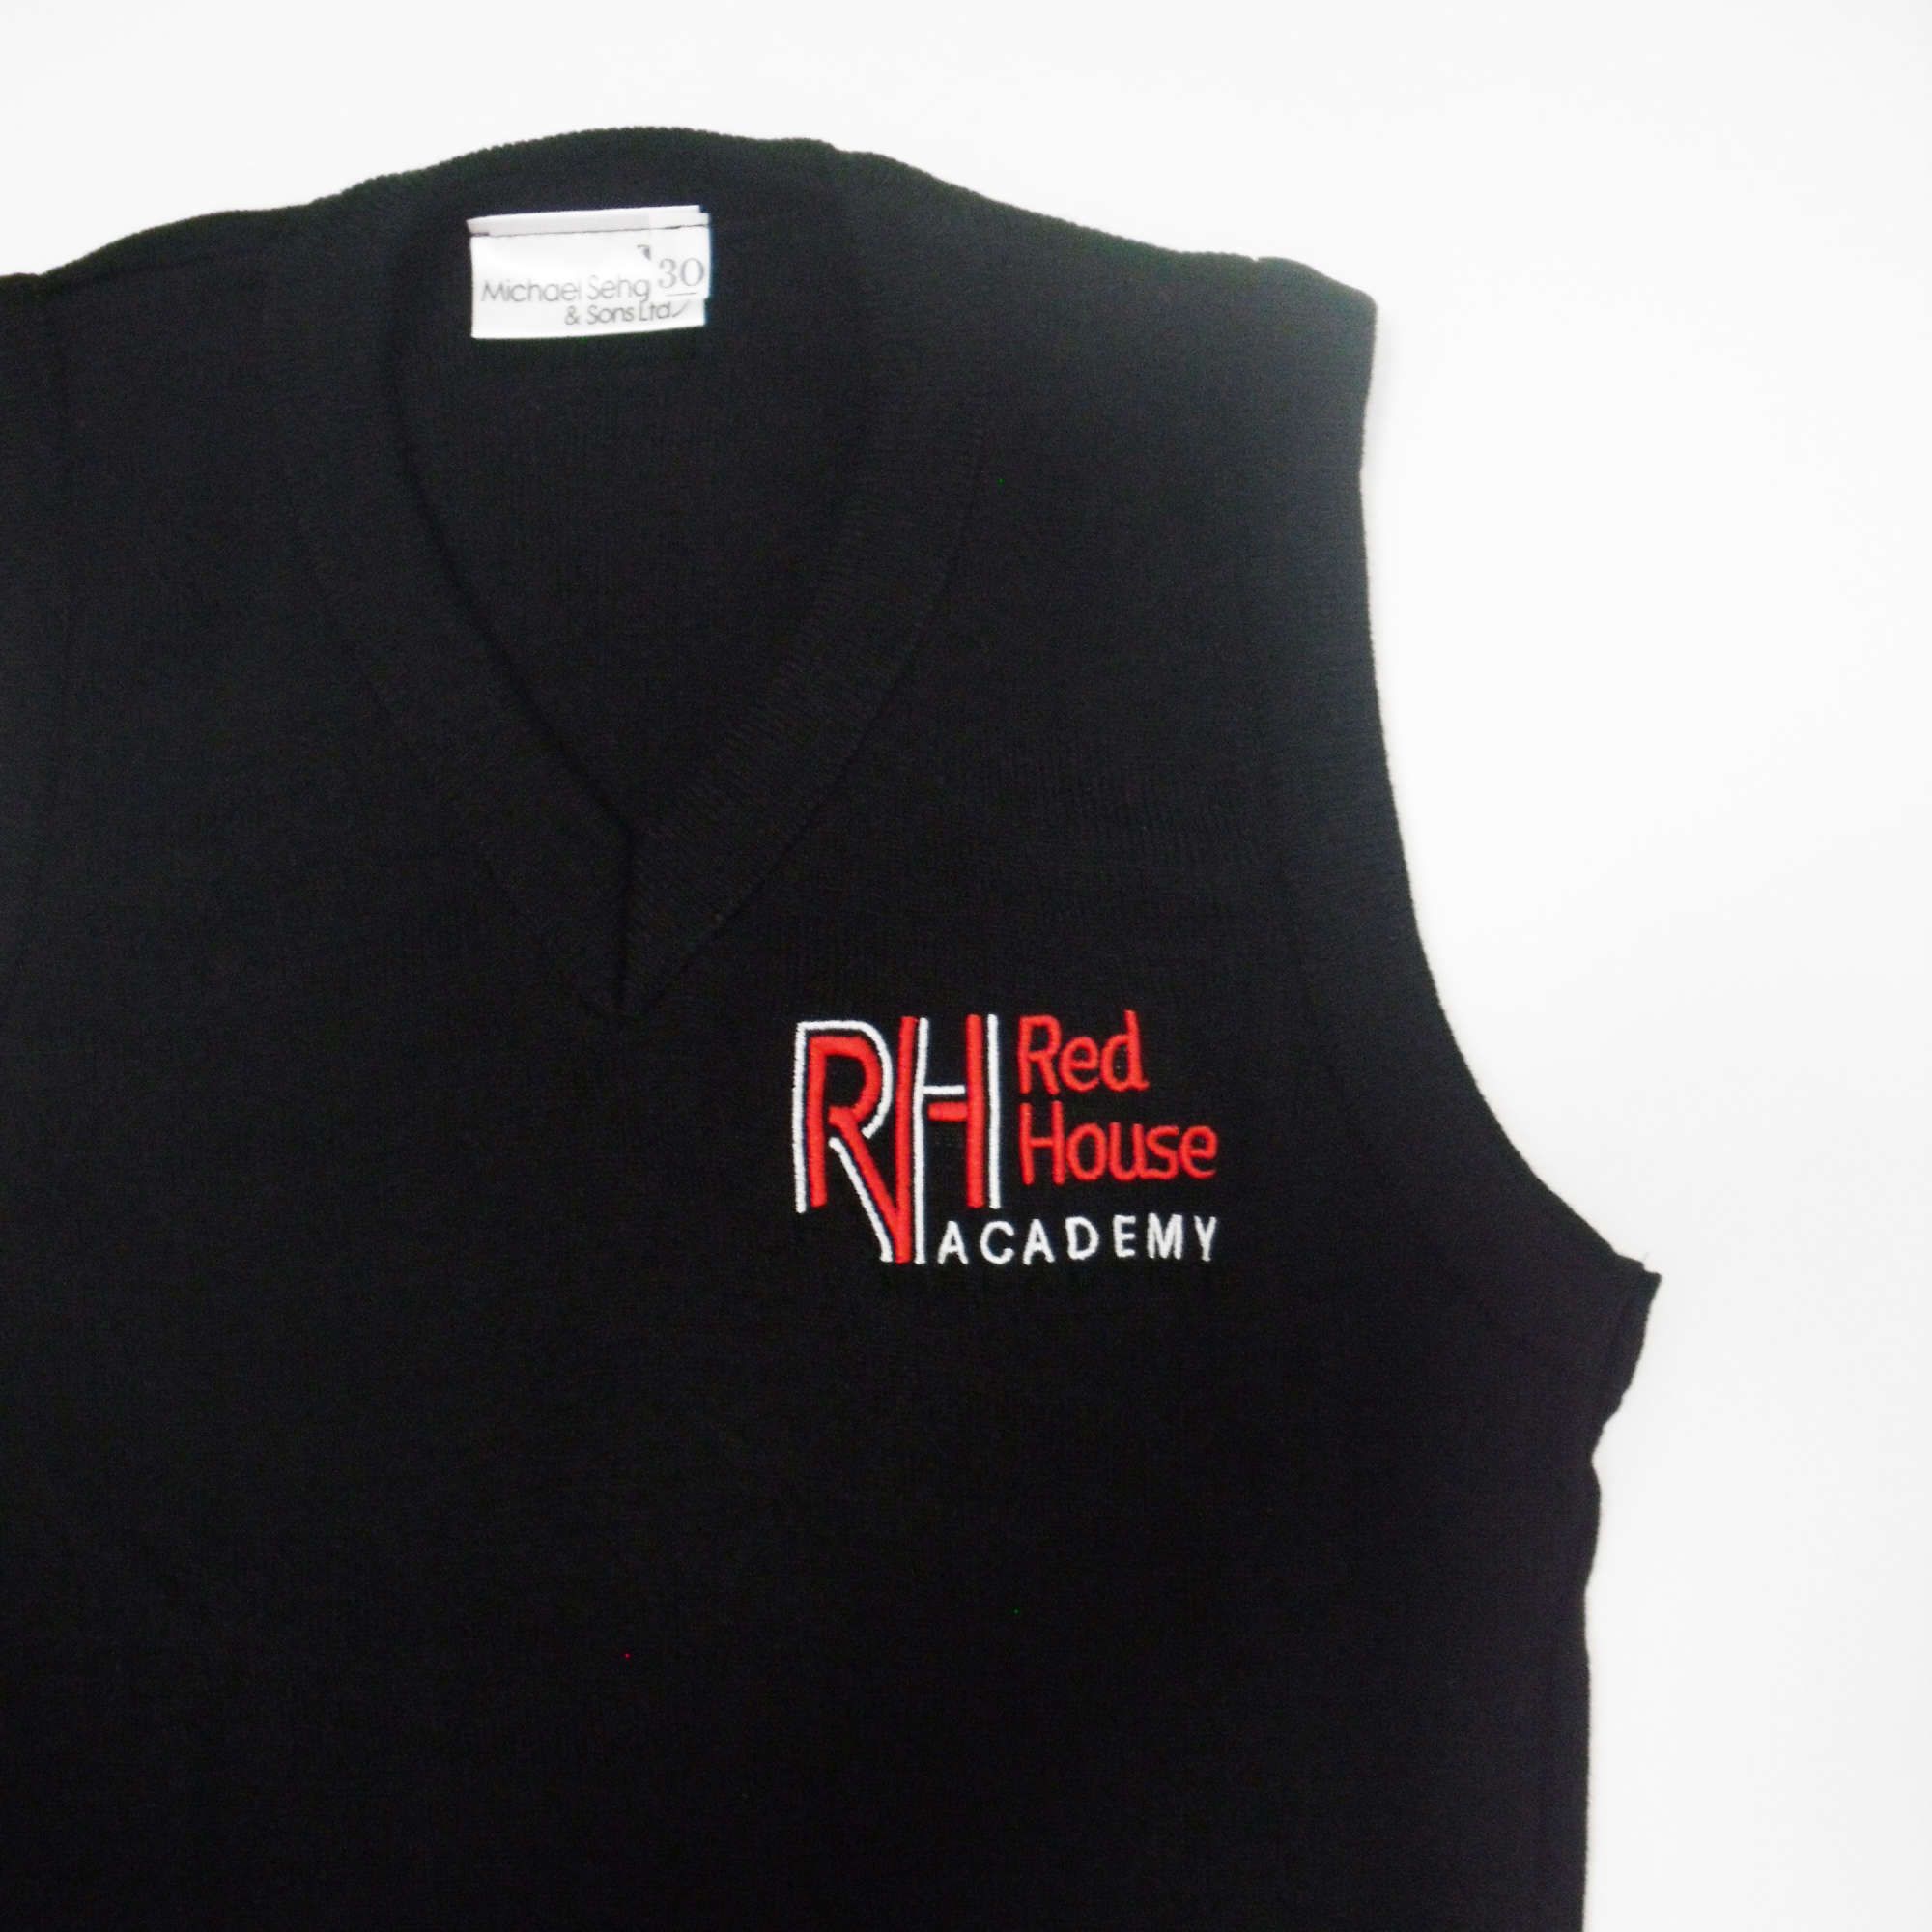 Red House Clothing Logo - Uniform. Red House Academy